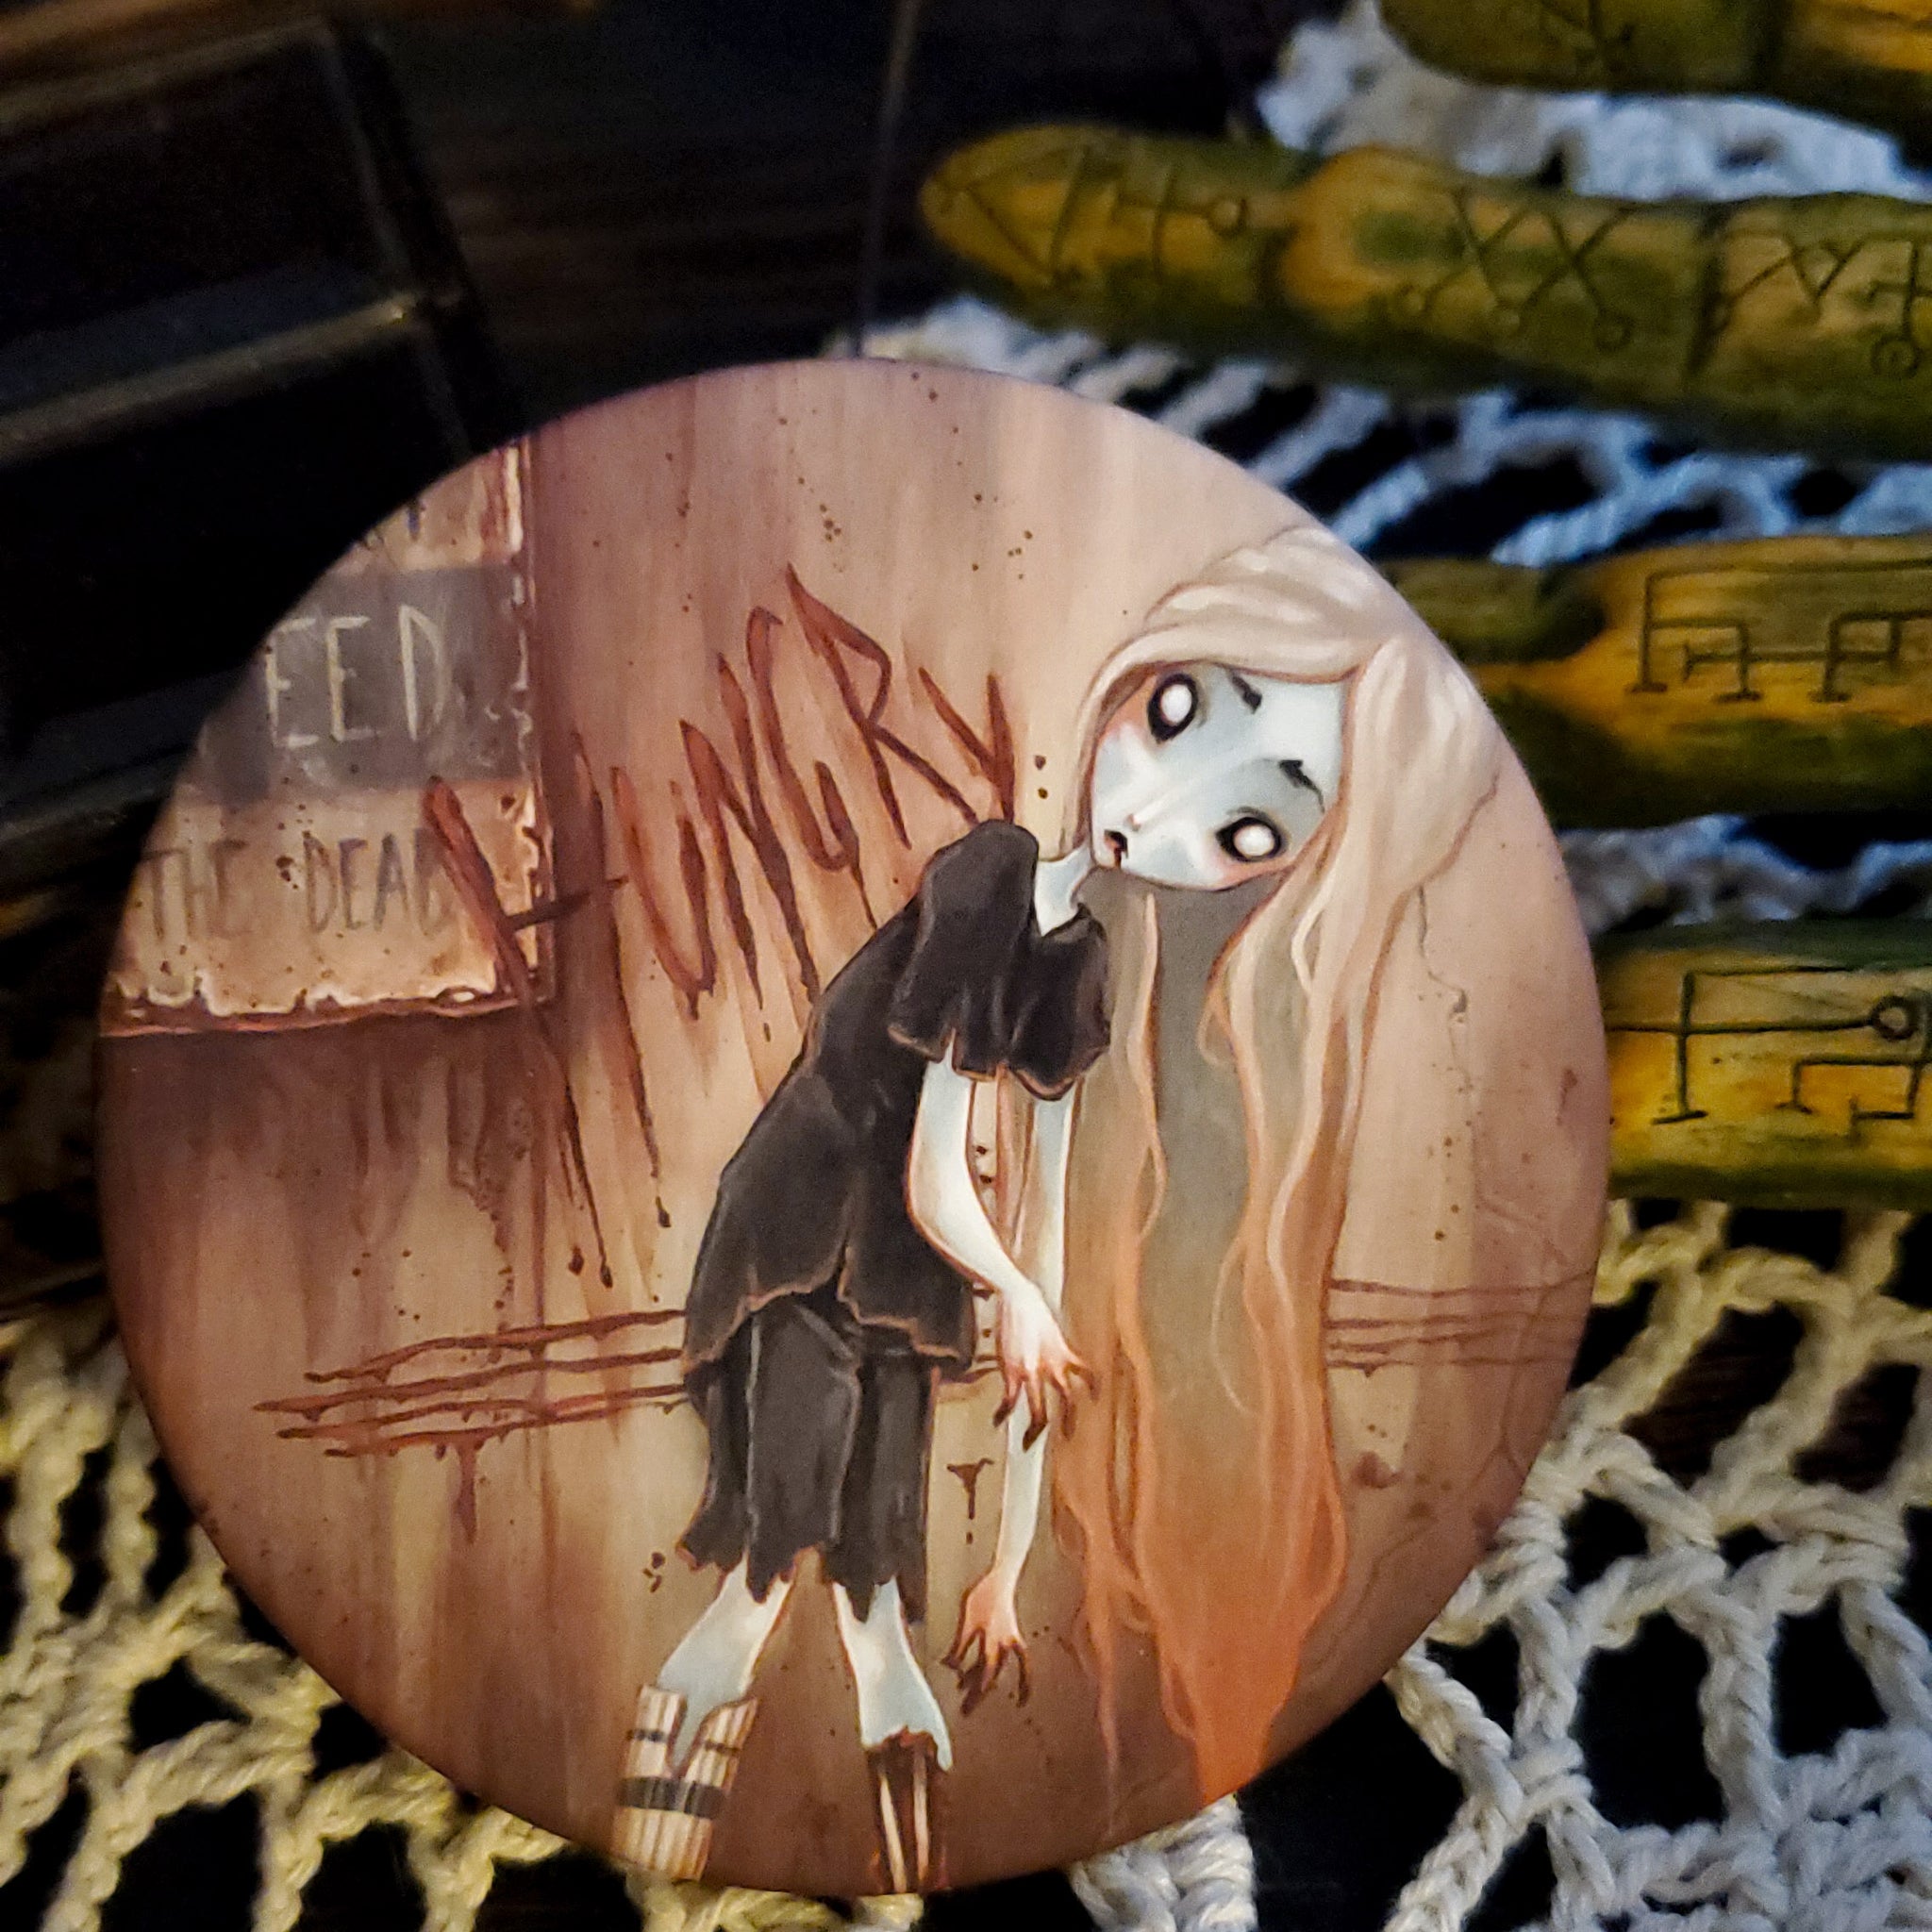 The Hunger zombie large pin back button